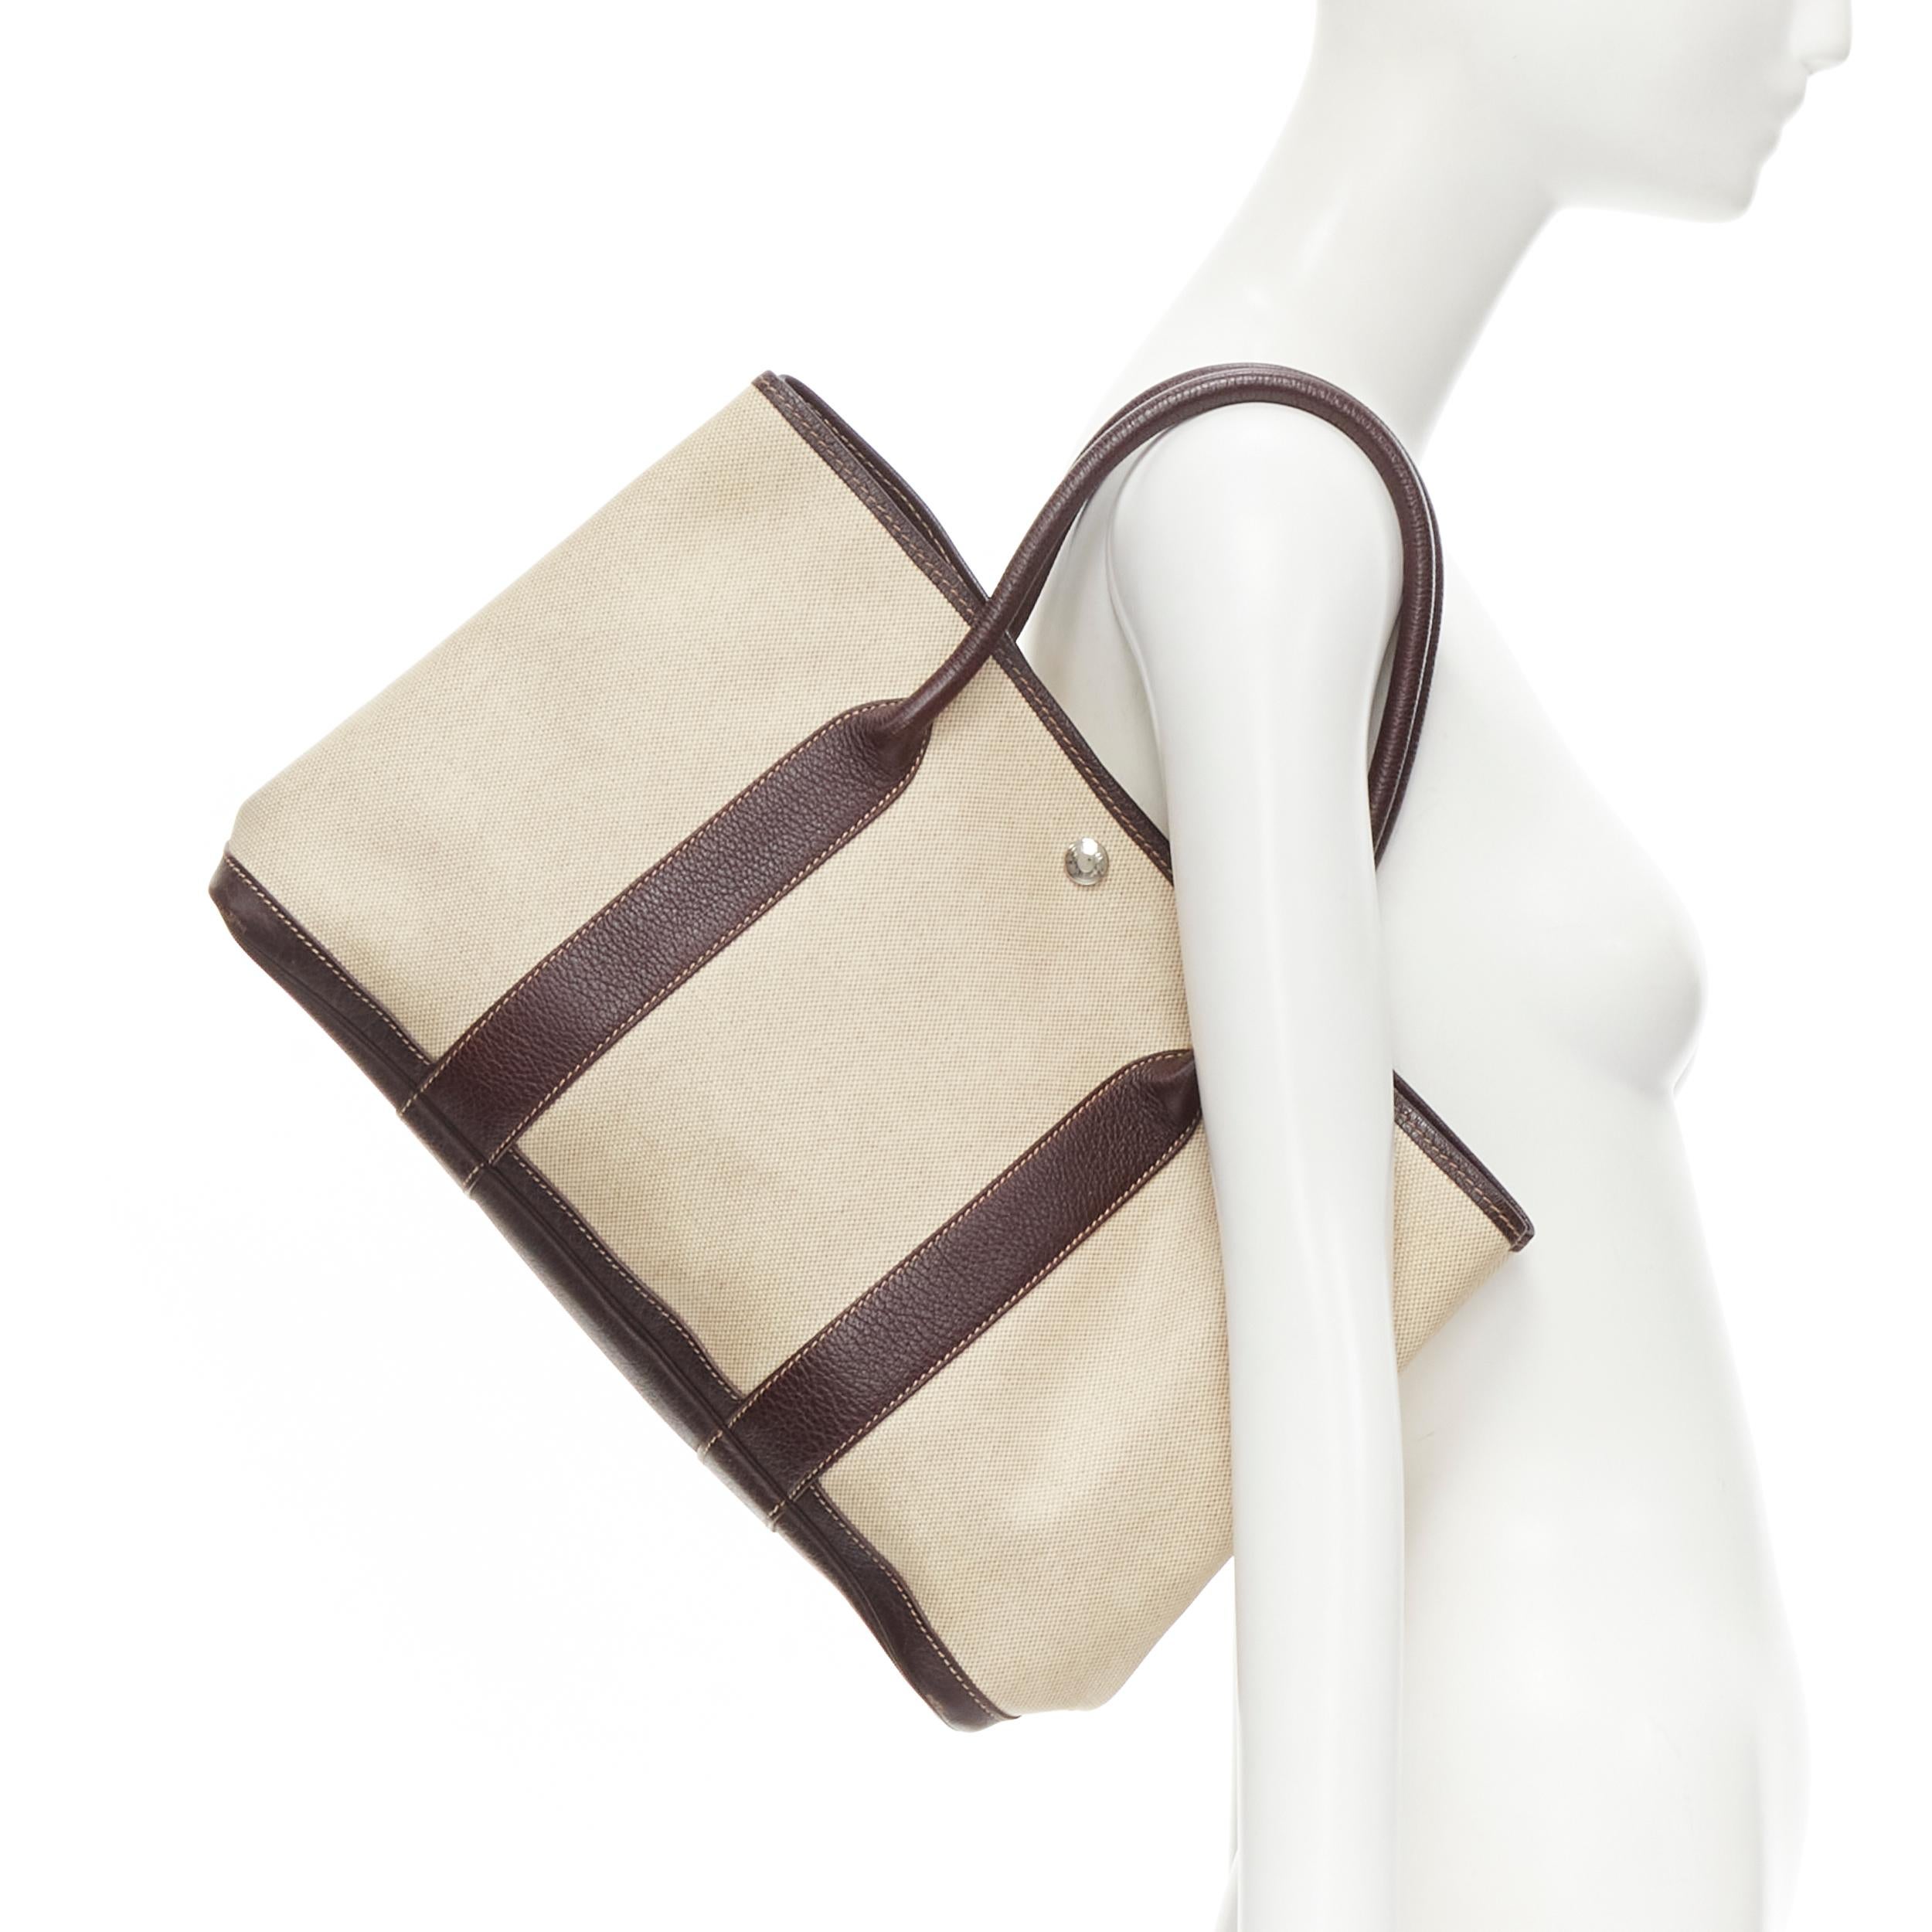 HERMES Garden Party 36 beige coated canvas chocolate brown leather trim tote bag 
Reference: GIYG/A00241 
Brand: Hermes 
Model: Garden Party 36 
Material: Canvas 
Color: Beige 
Pattern: Solid 
Extra Detail: Beige coated canvas. Chocolate leather